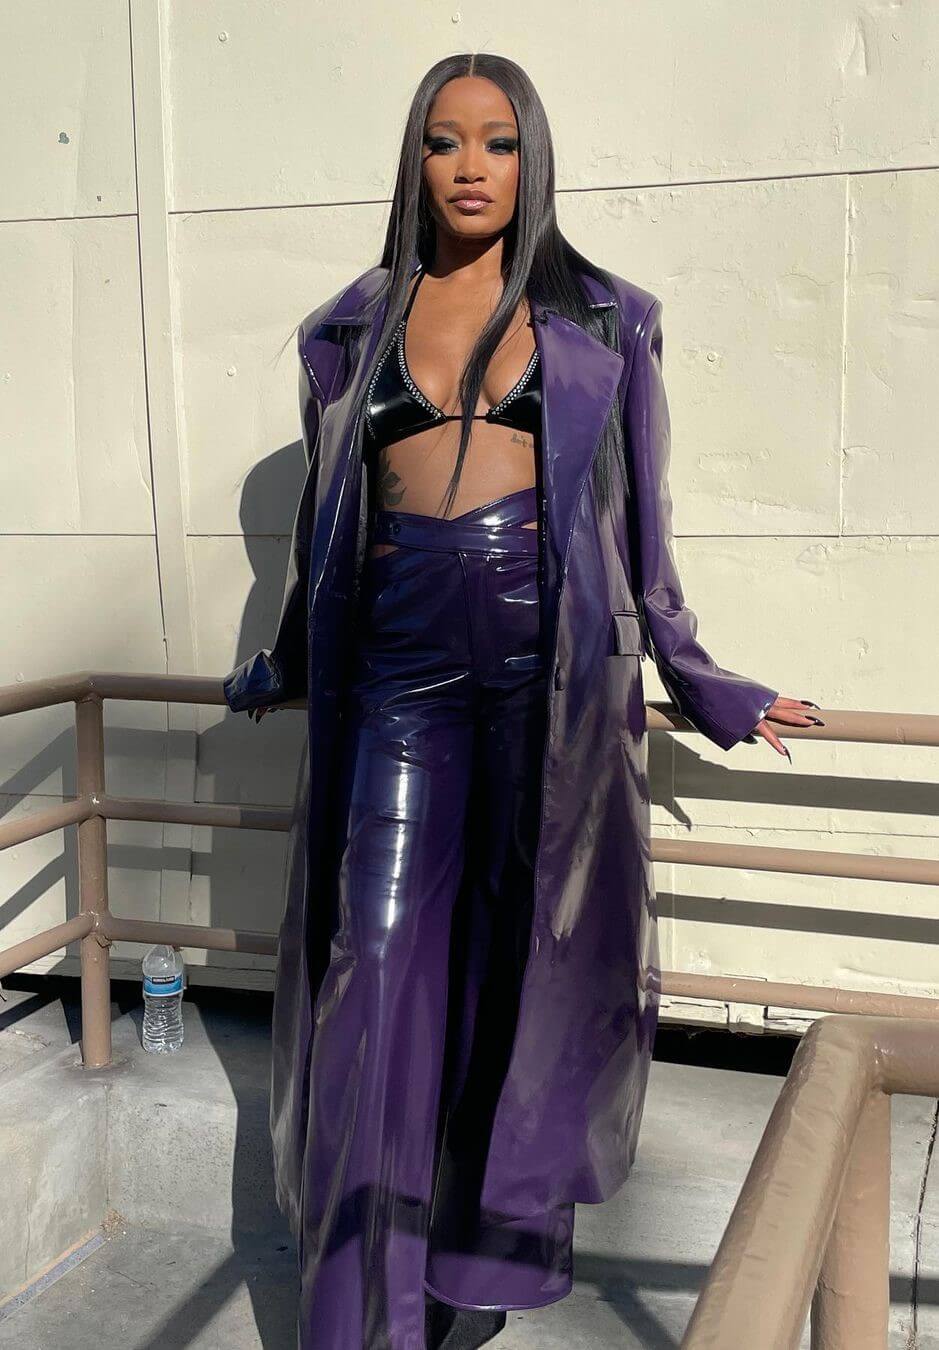 Keke Palmer Looks Extremely Gorgeous In A Purple Latex Silhouette